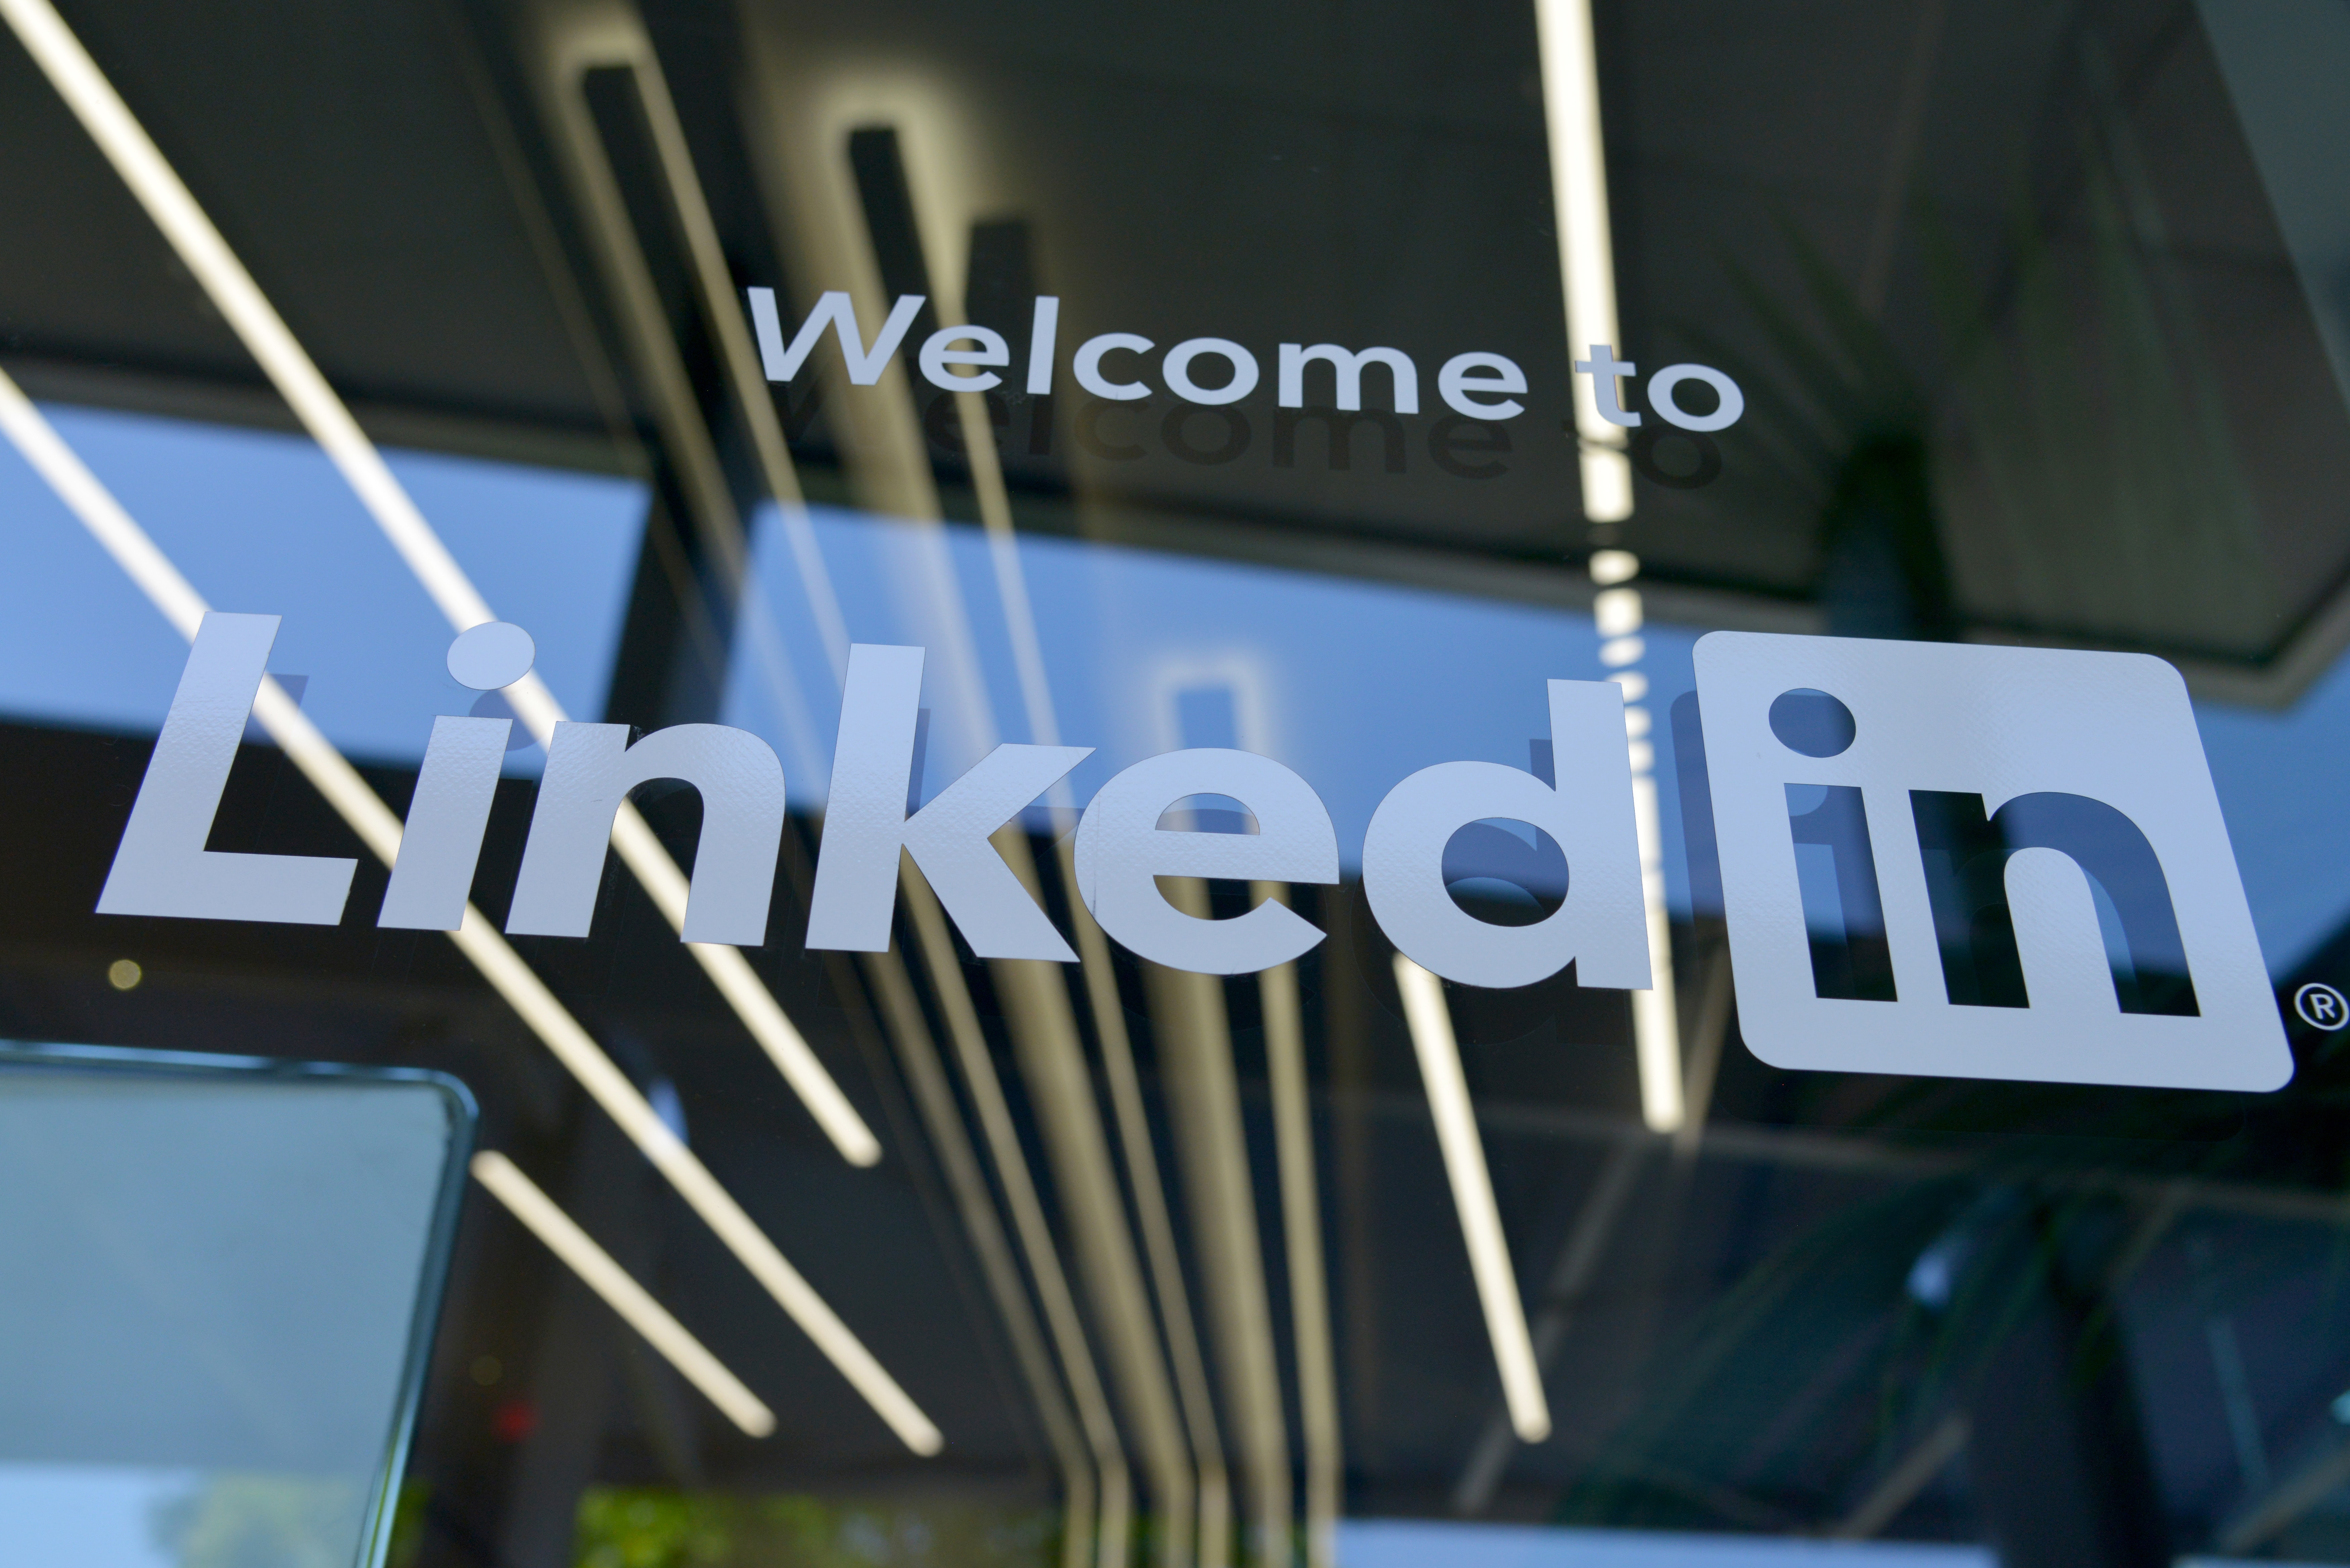 LinkedIn is working on developing an AI "coach" for job searching